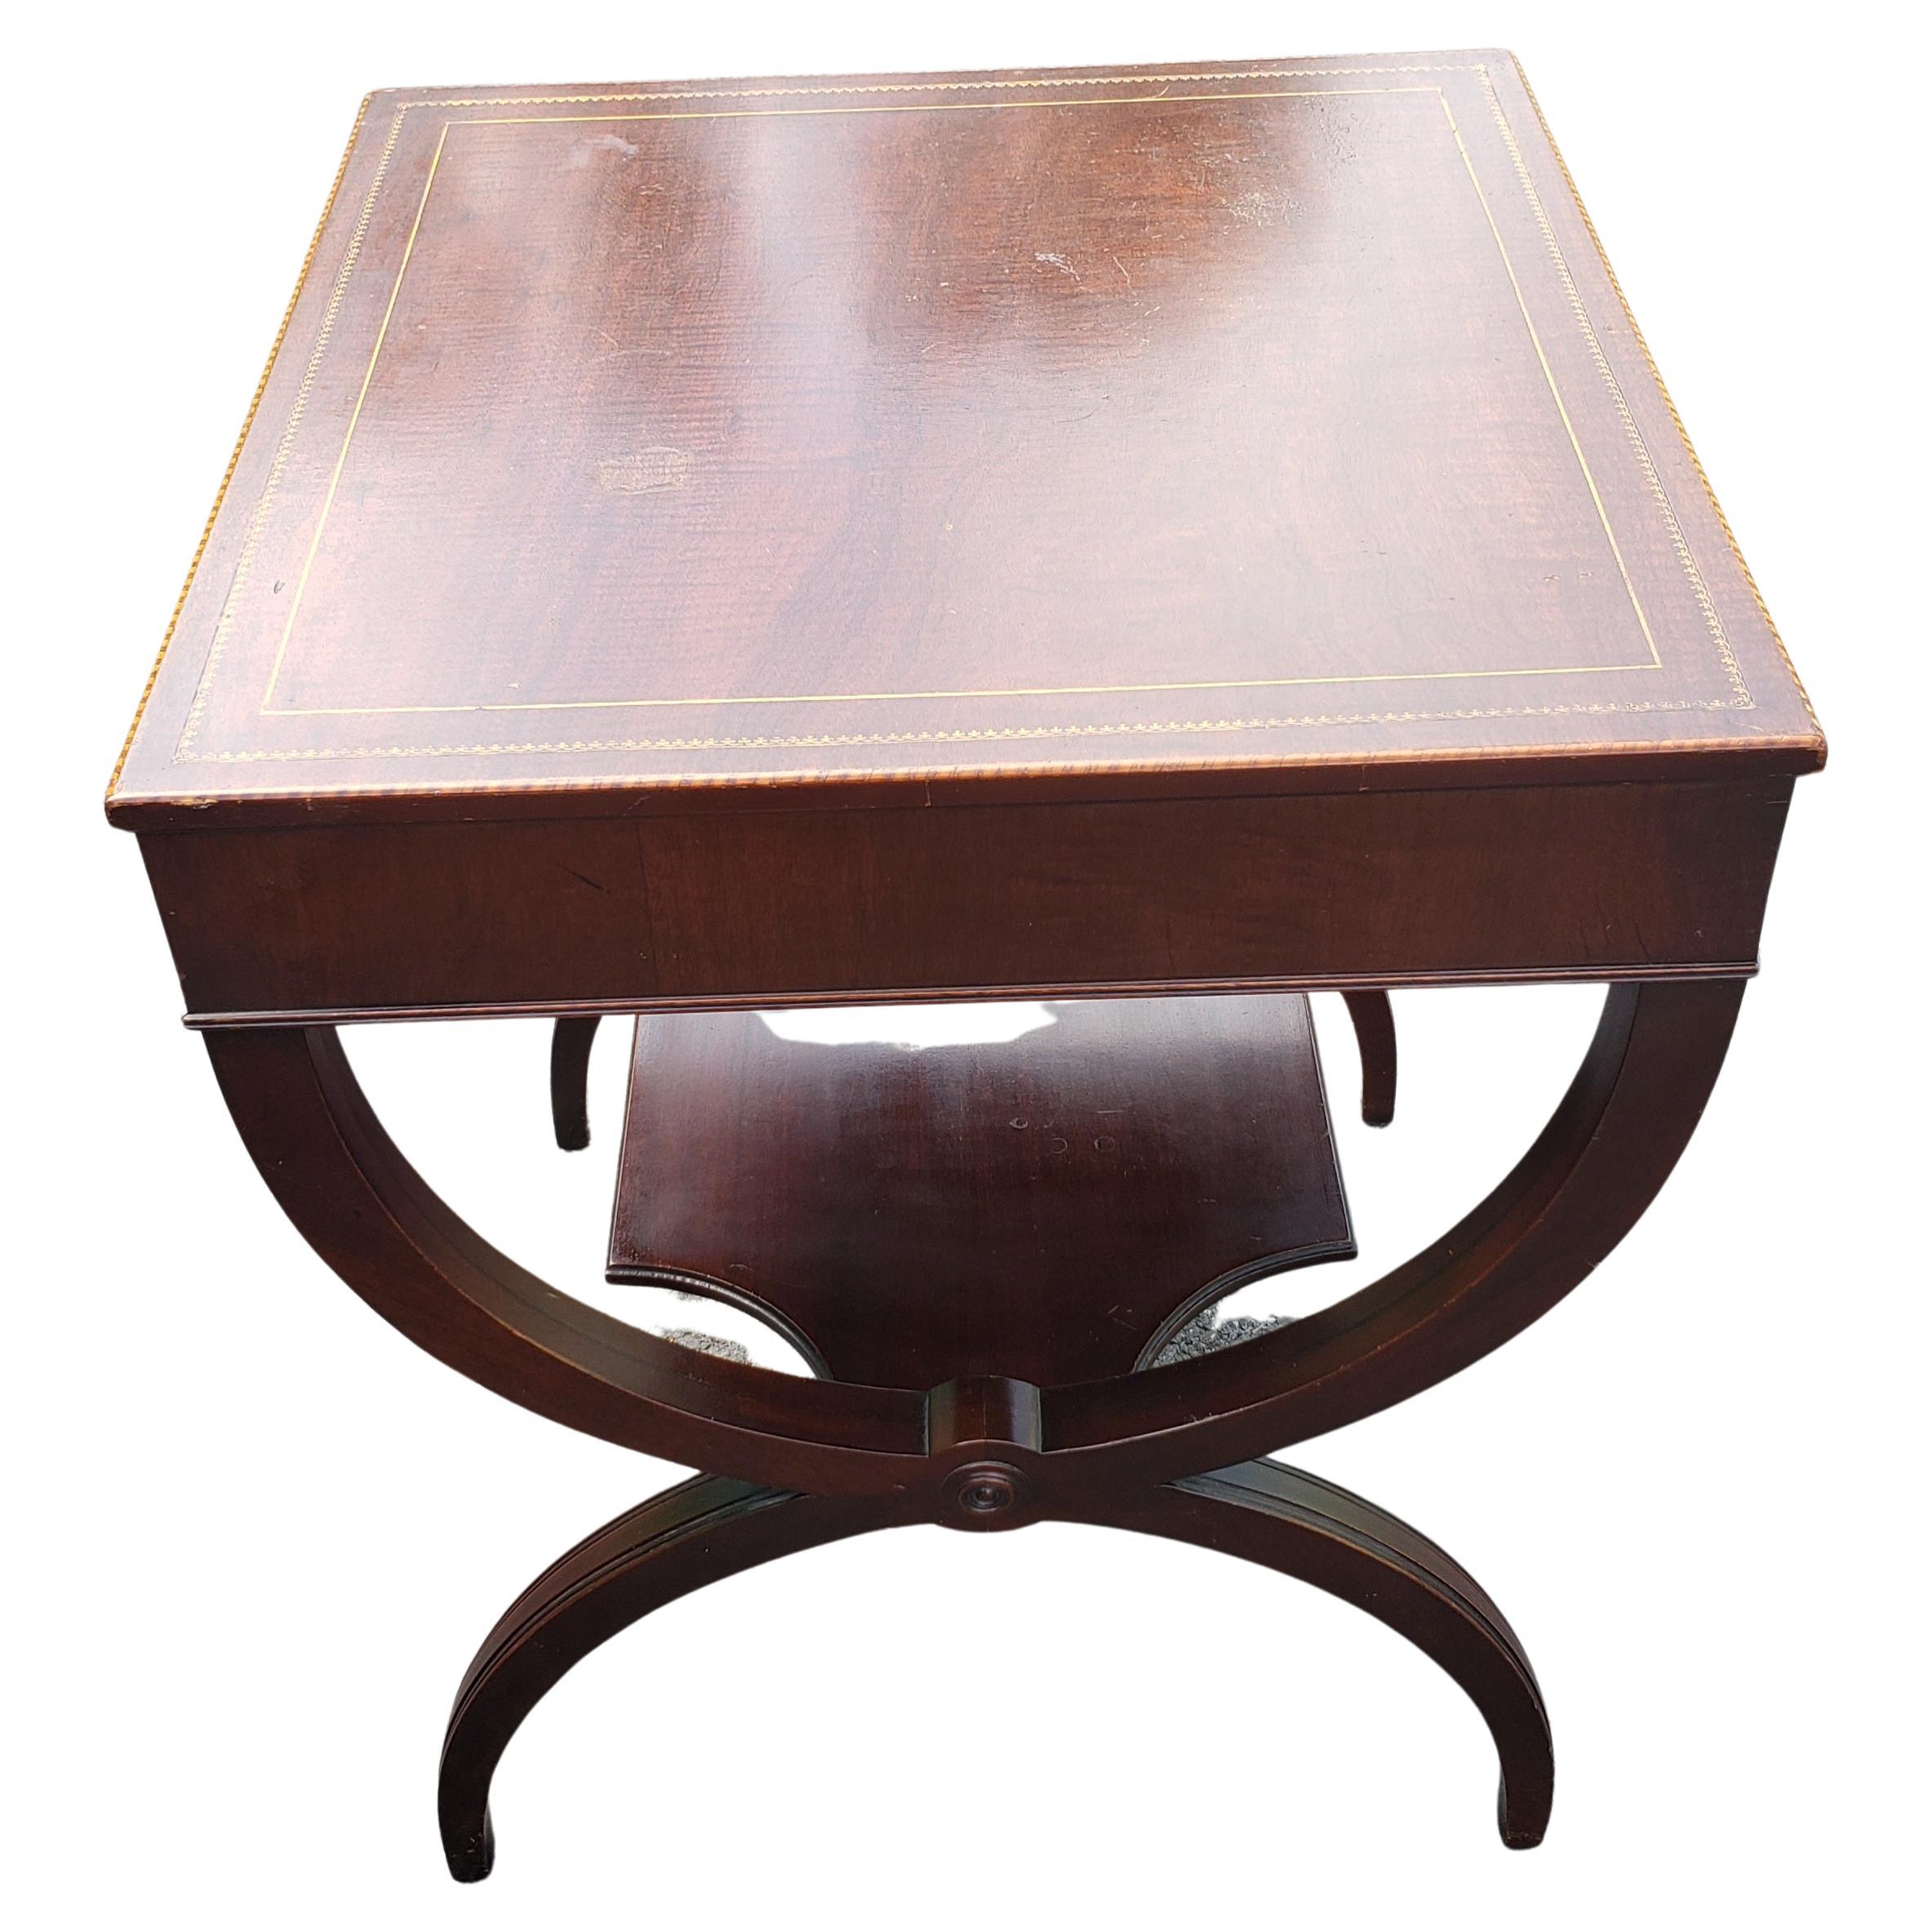 Woodwork Federal Mahogany Inlaid and Stinciled Top Accent Table For Sale